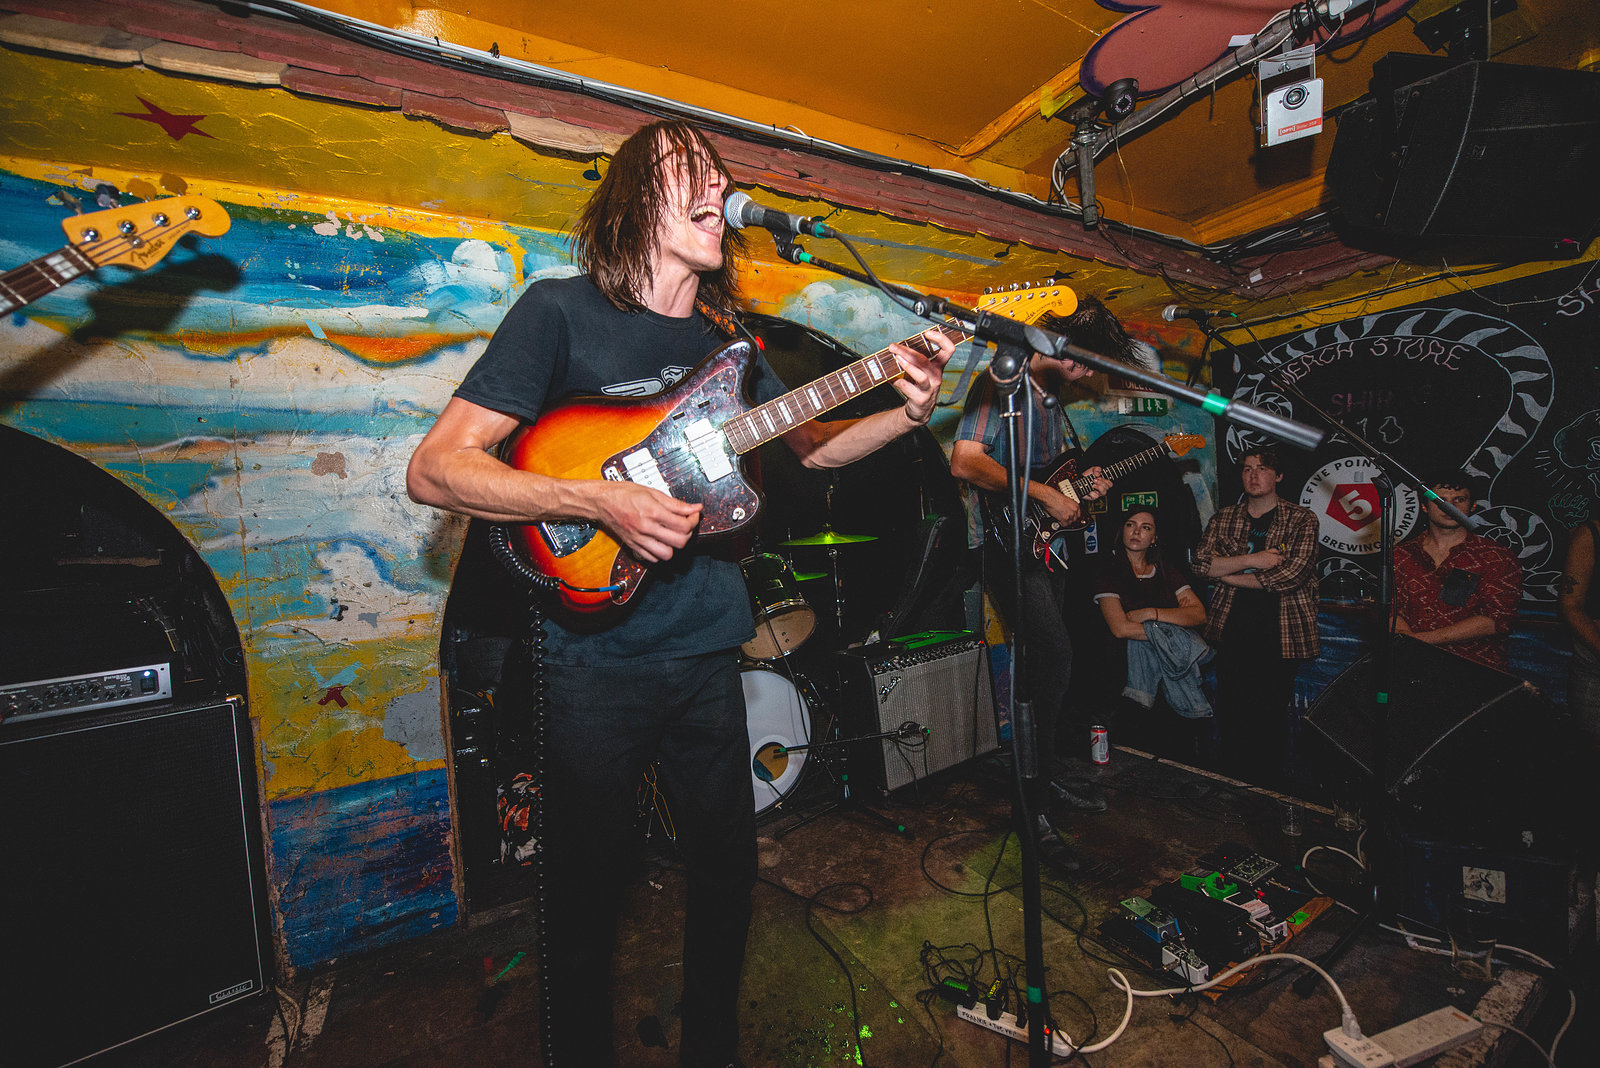 Frankie & The Witchfingers at The Shacklewell Arms, London, May 2018